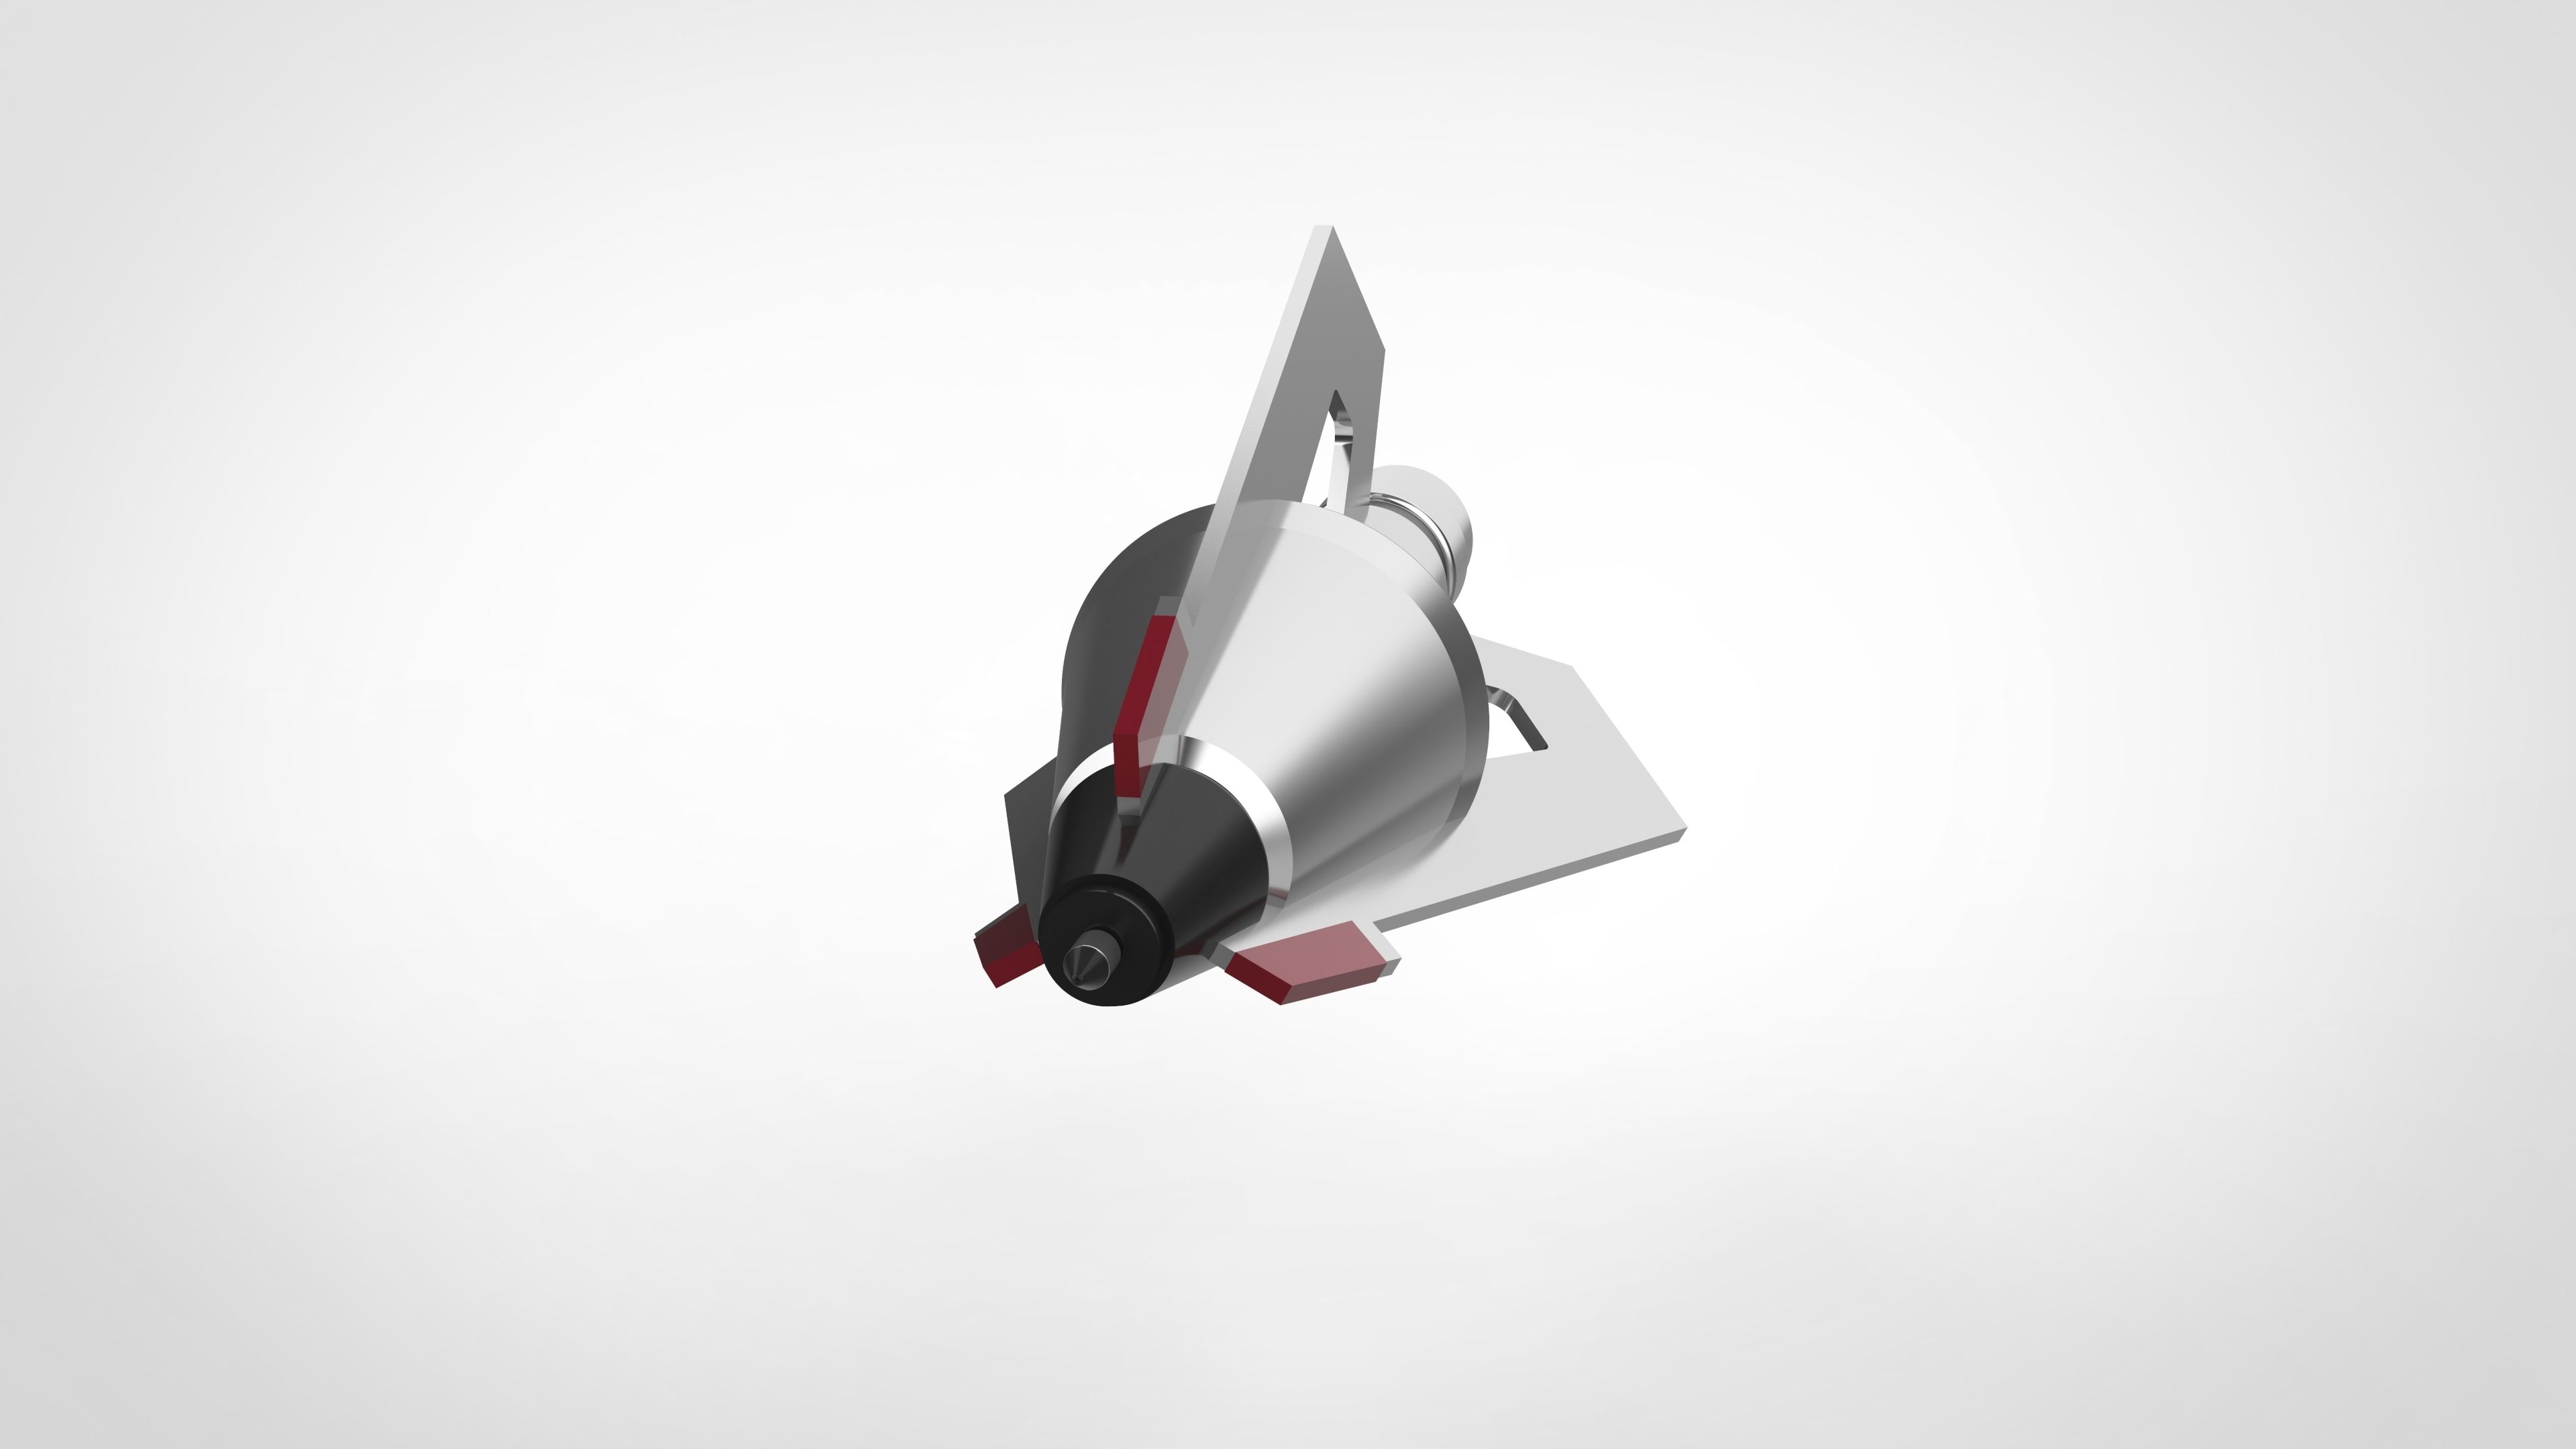 031.jpg Download file The Hawkeye arrowhead 4 from the movie "Avengers: Age of Ultron" • 3D print design, vetrock